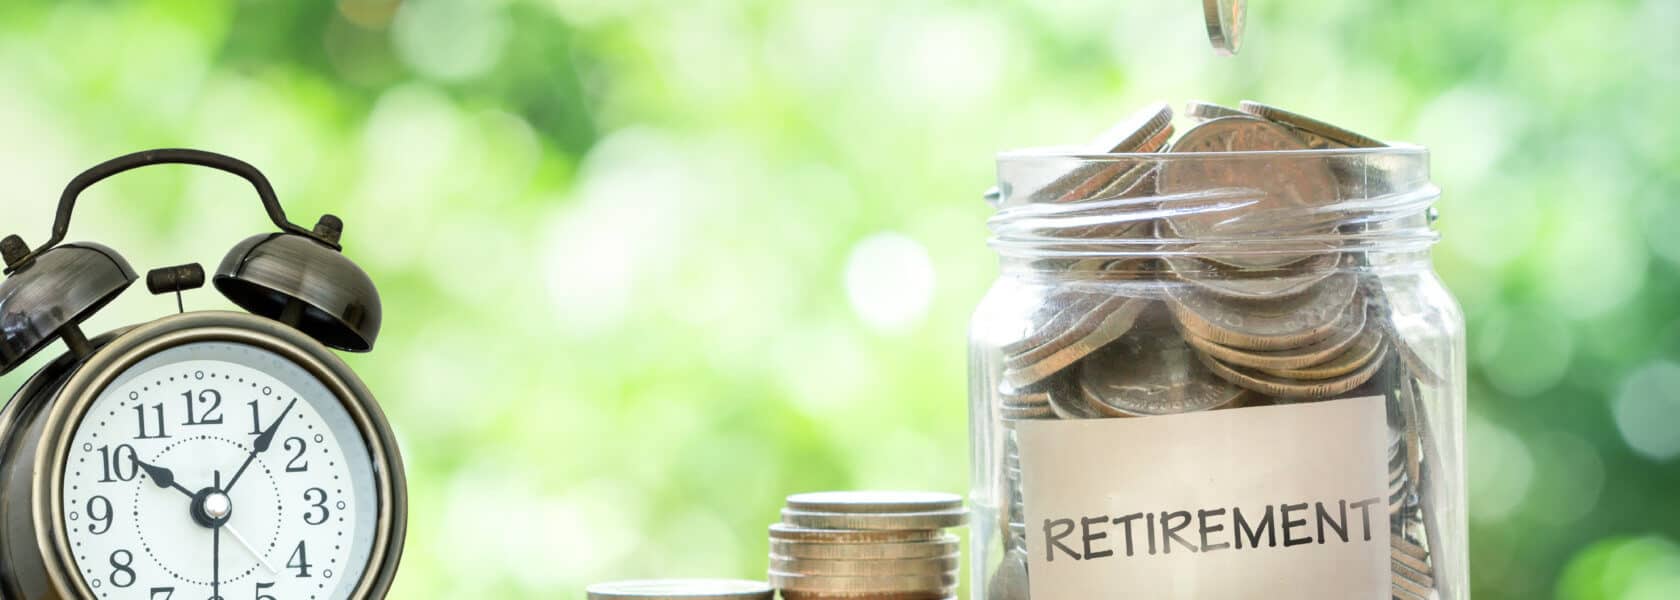 Why You Should Start Saving for Retirement in Your 20s.jpg